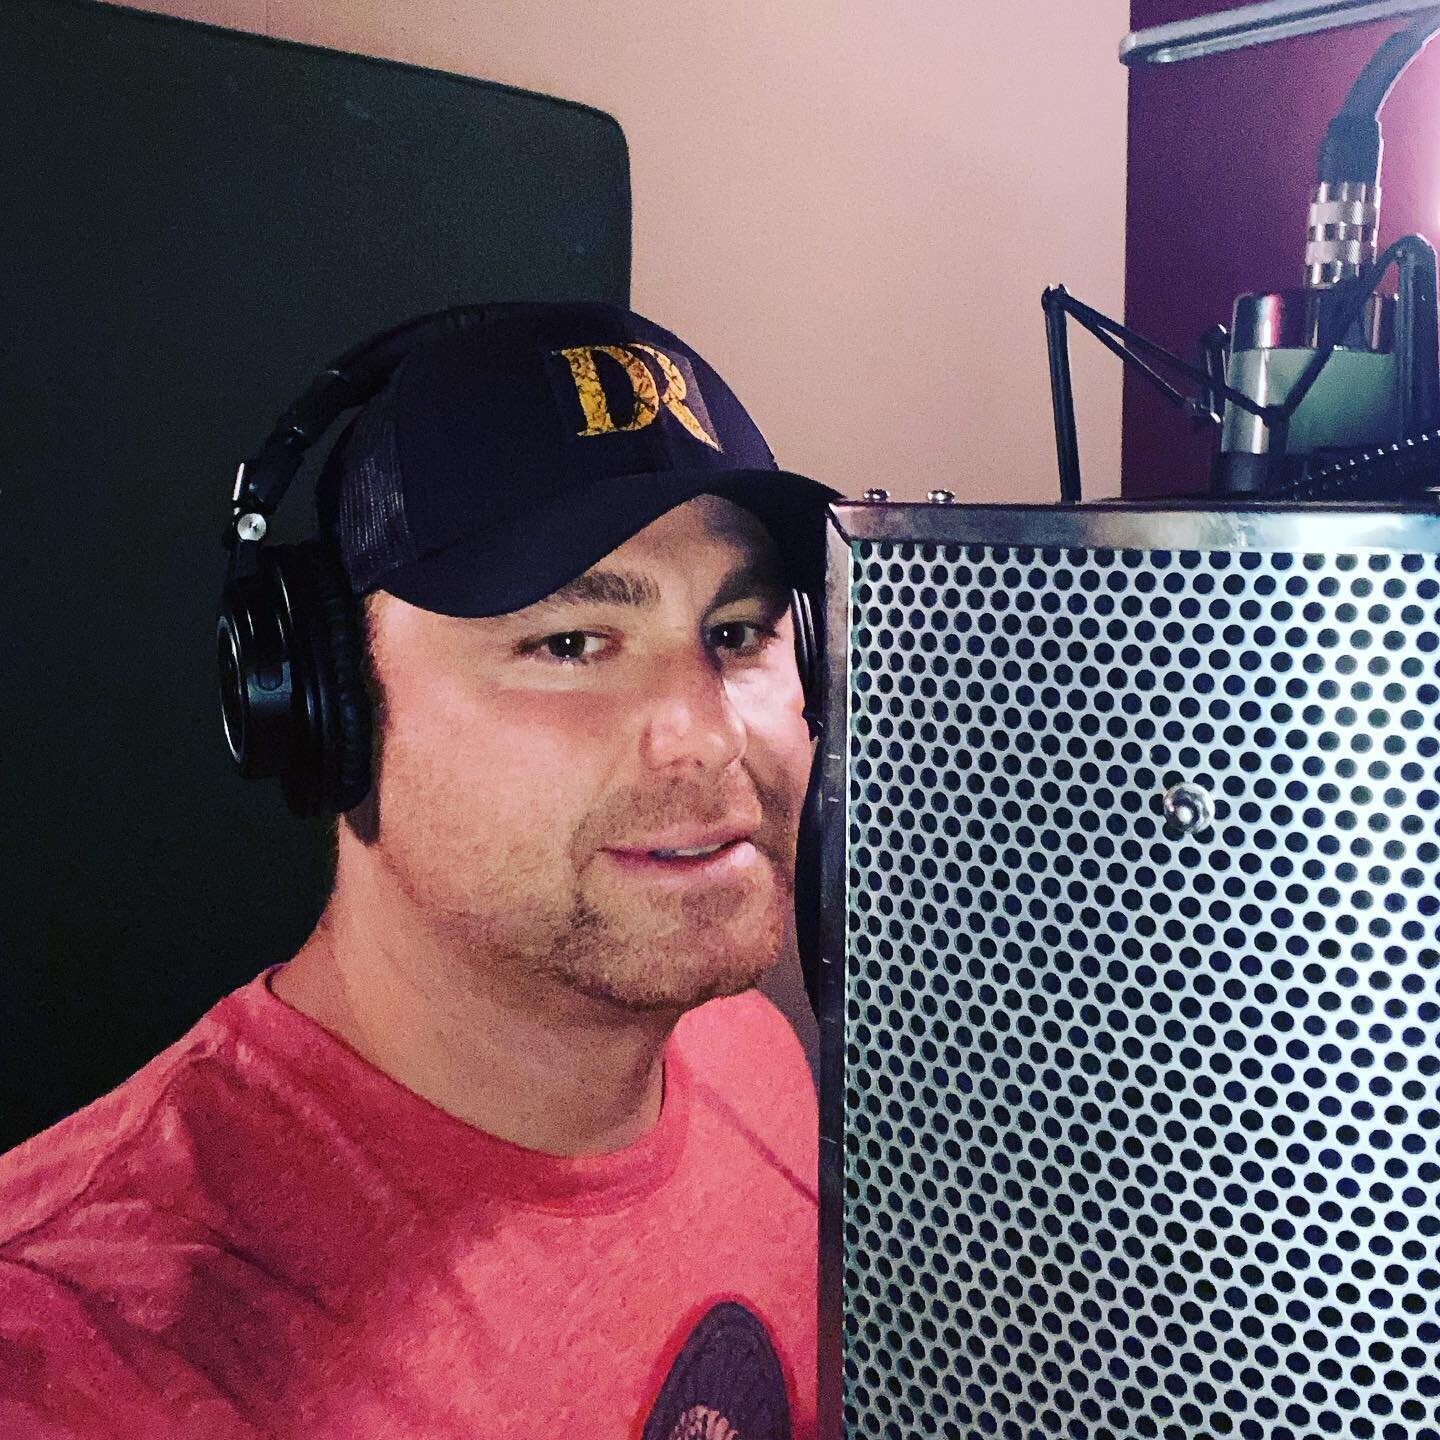 Amazing studio session yesterday! Can&rsquo;t wait to share some stuff real soon! #bts #btsedits #newmusicalert #countrymusic #lfg